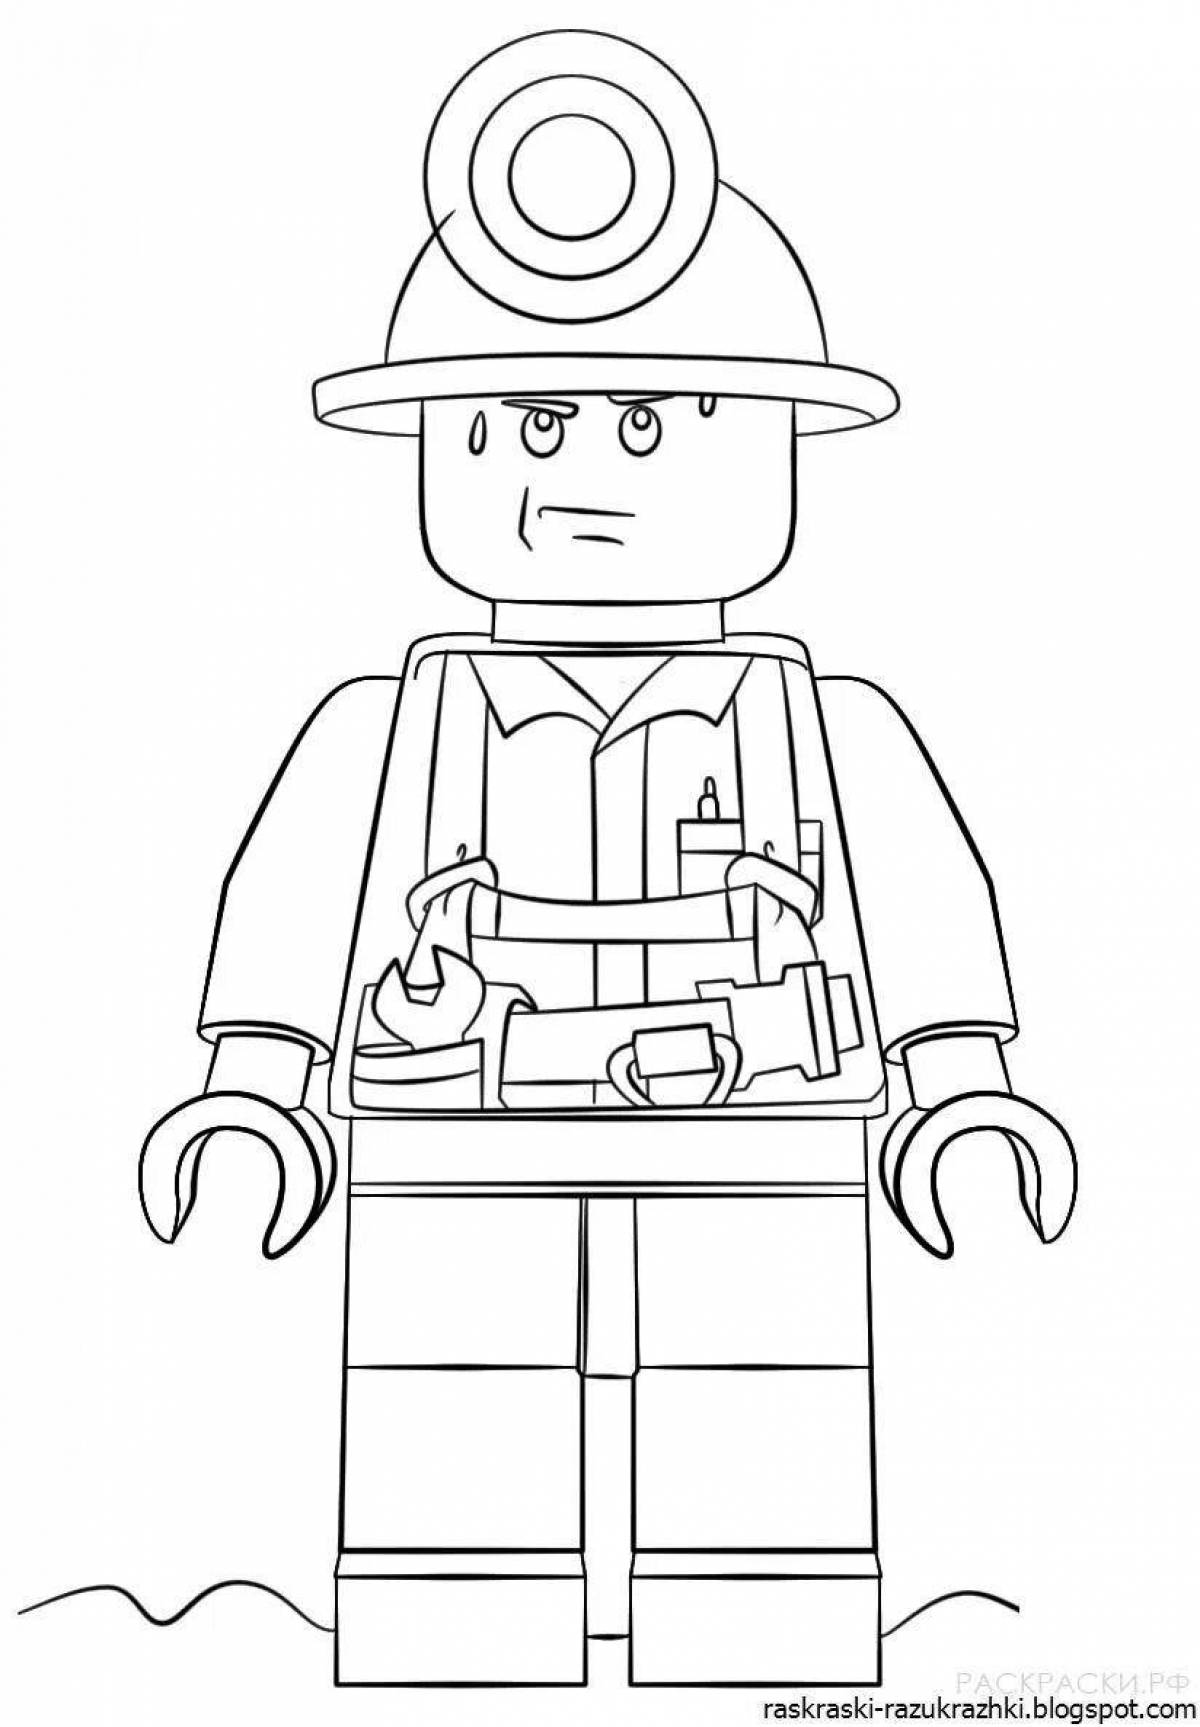 For kids lego #2